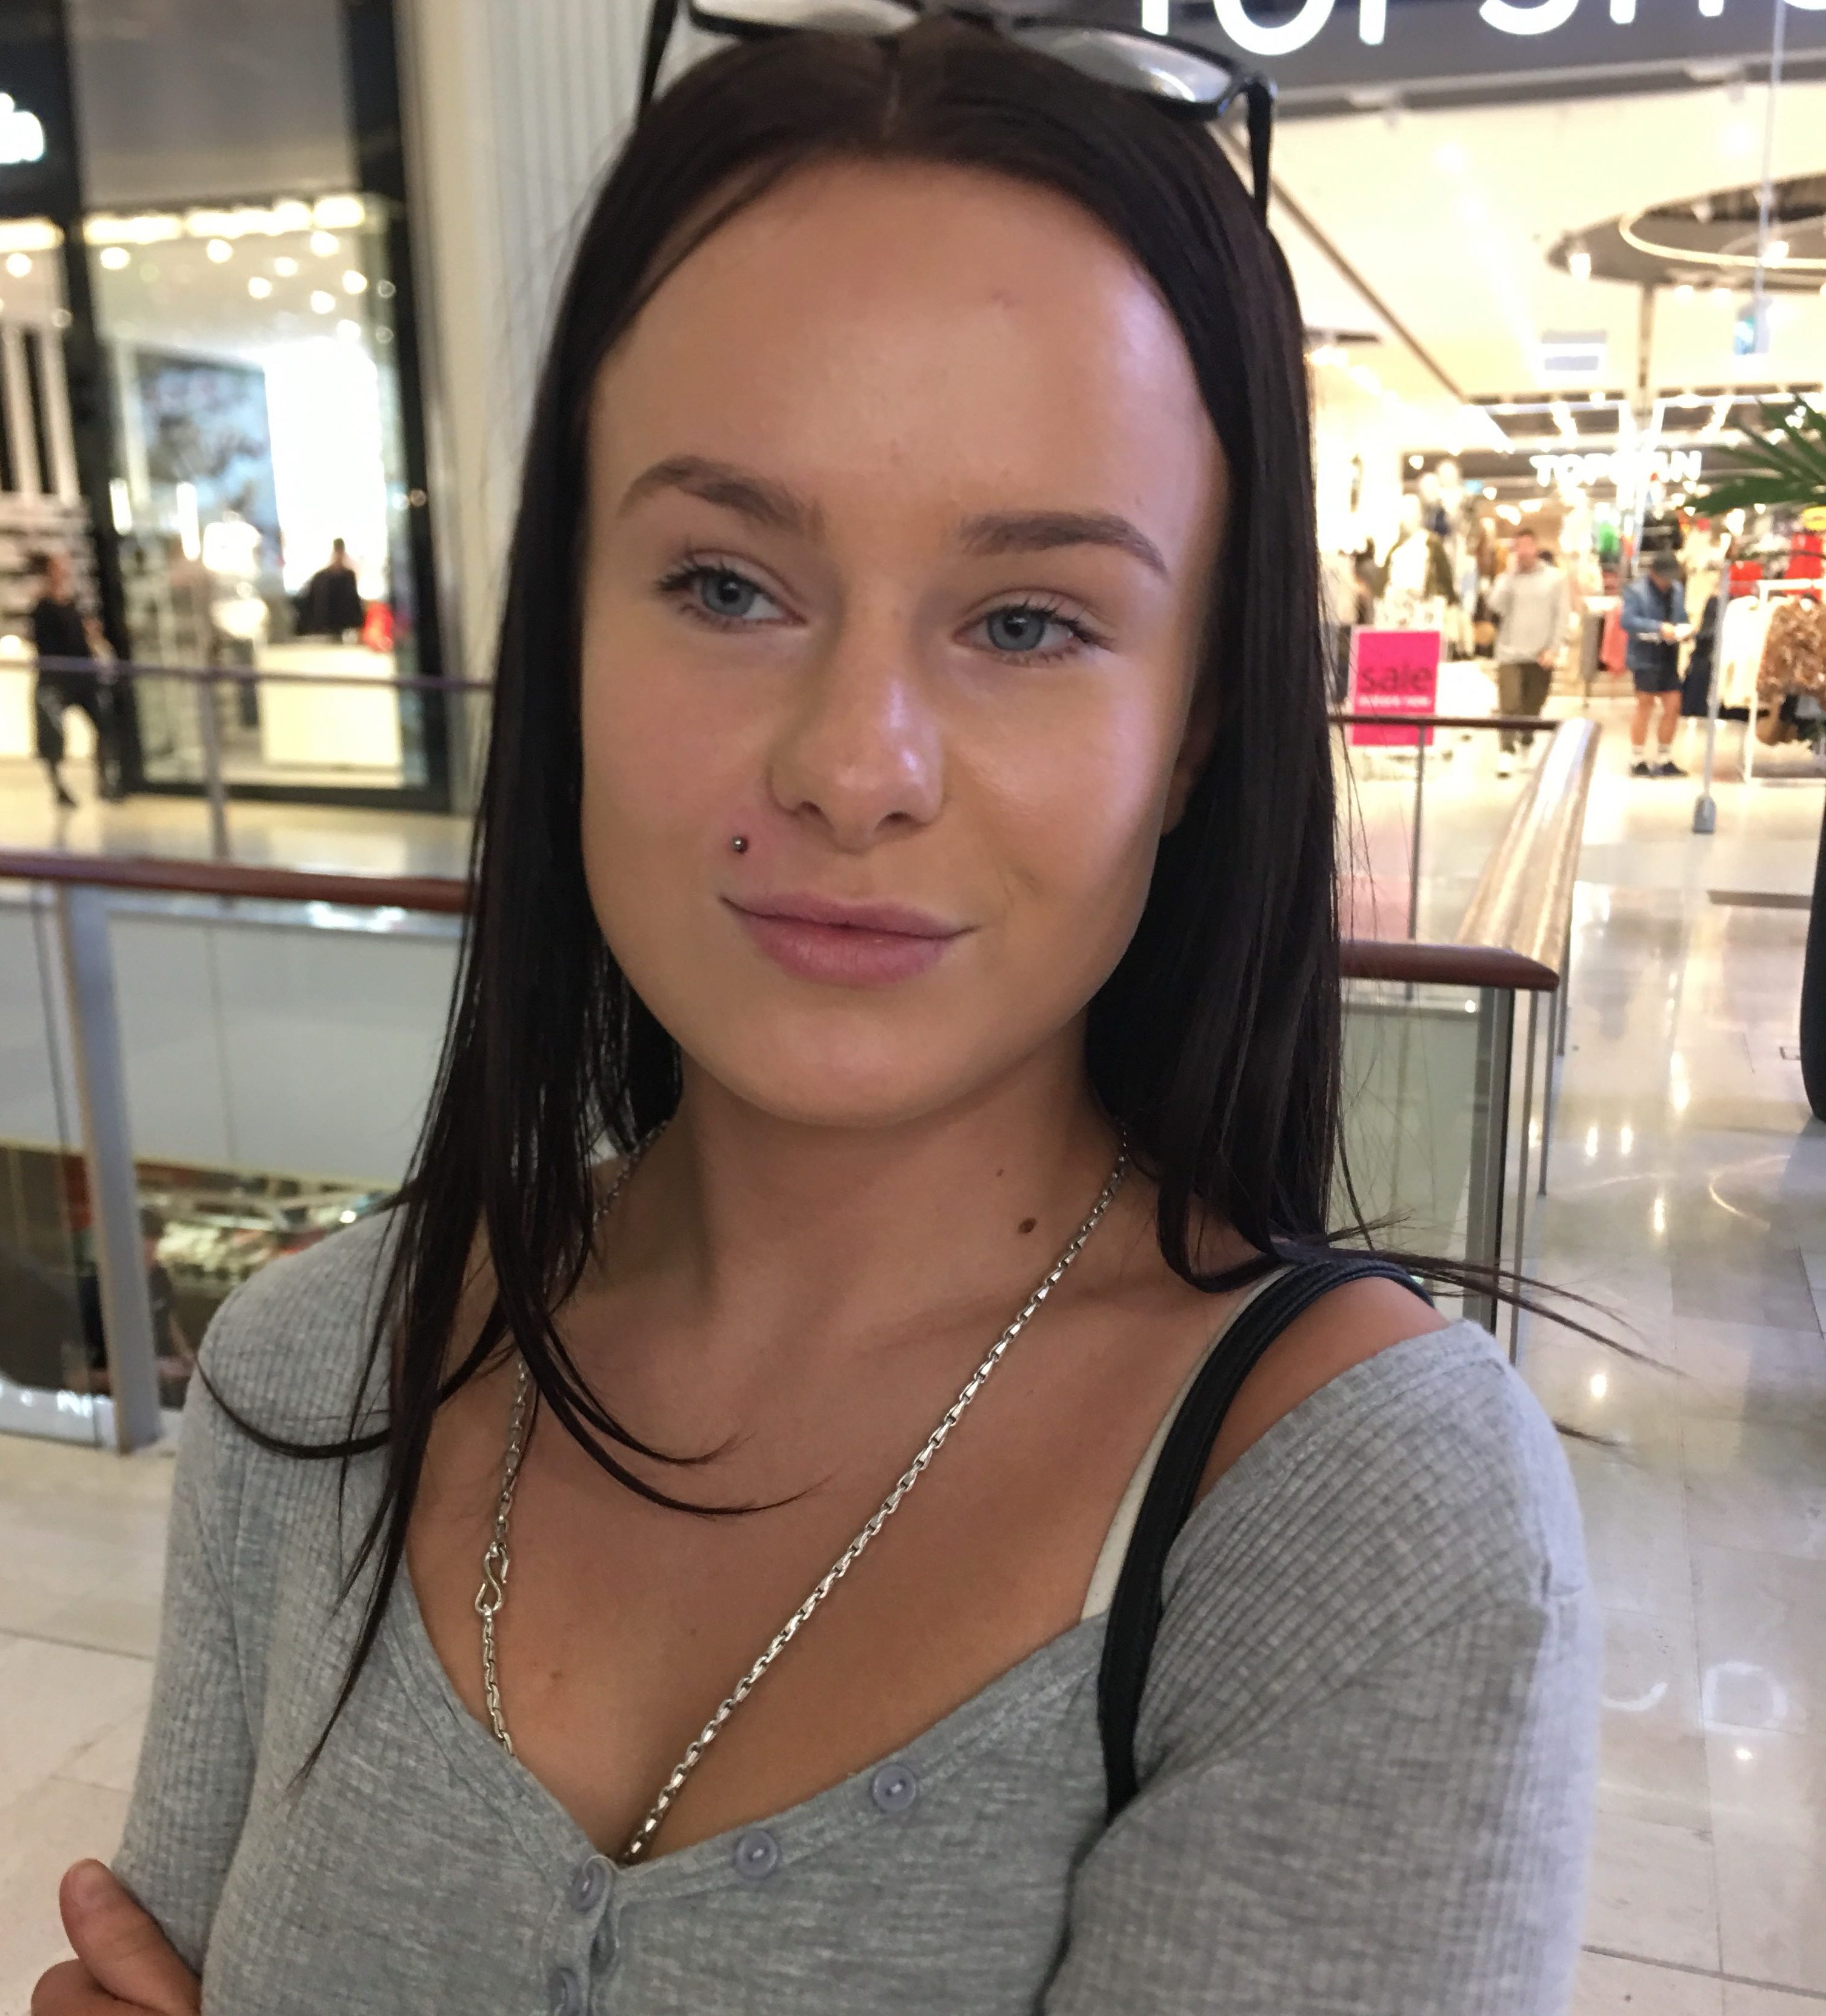 Have you seen 16-year-old Samantha?